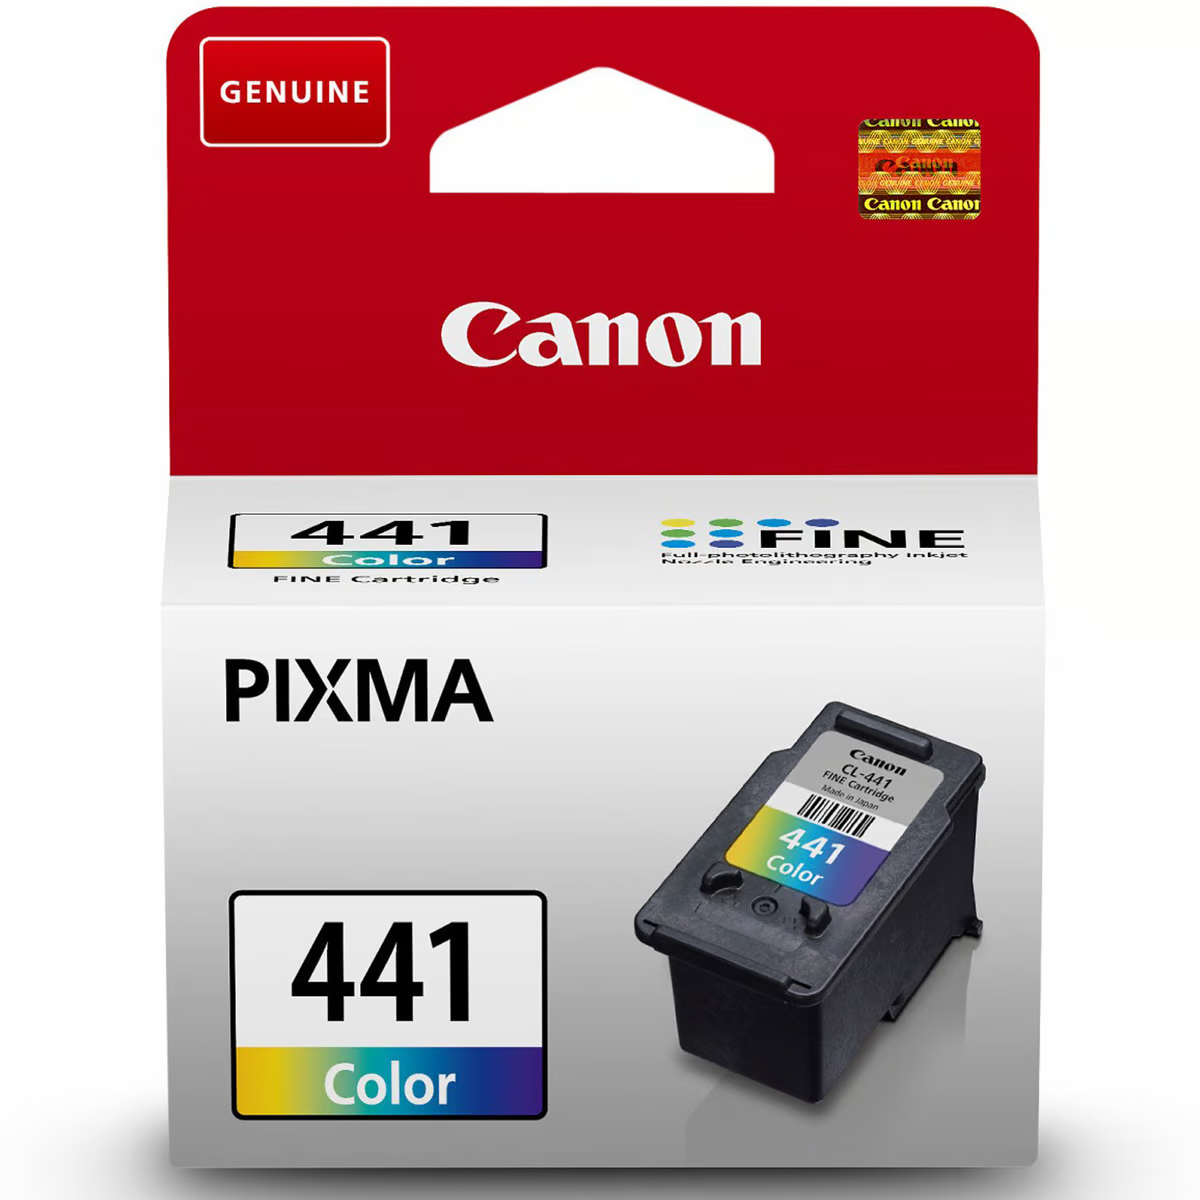 Canon Cartridge 441 Color - YOUTOO TRADING 